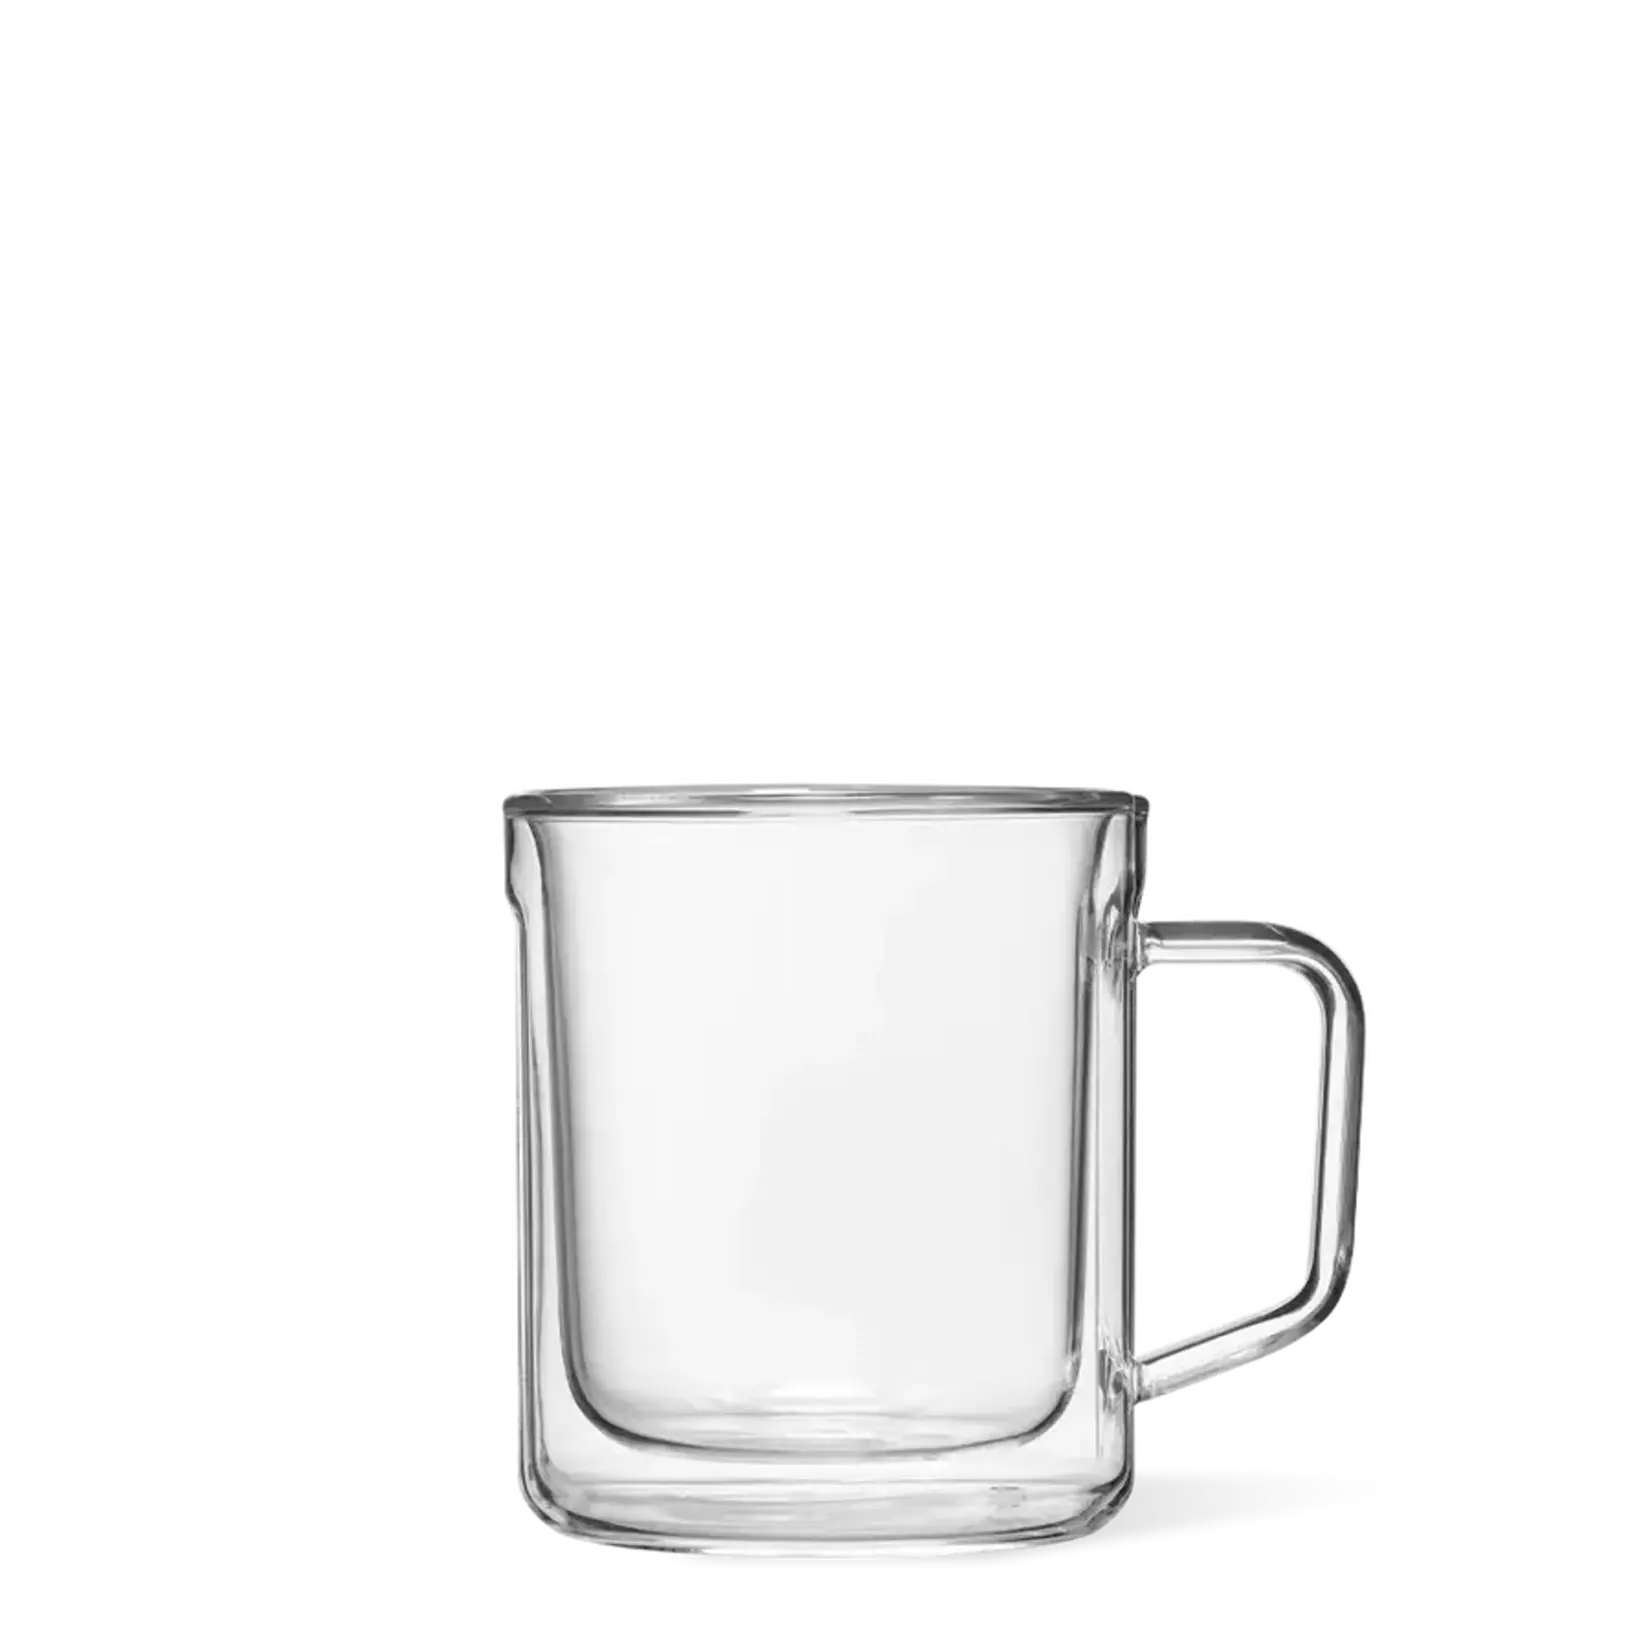 corkcicle Glass Mugs - 2 pack